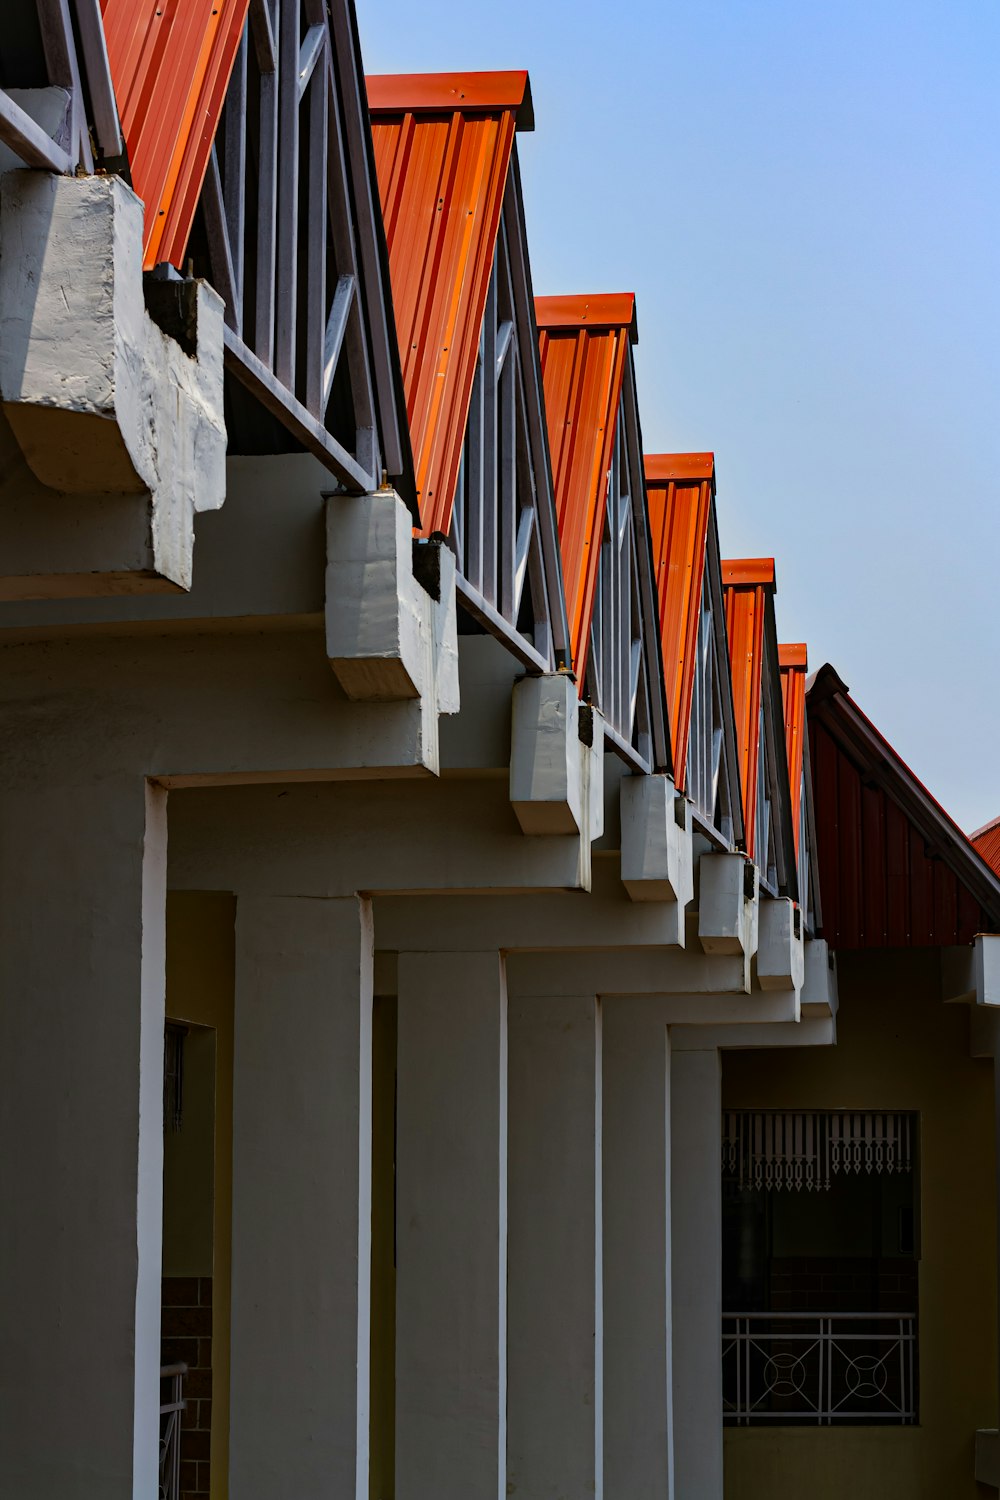 a row of orange roof tiles on a building